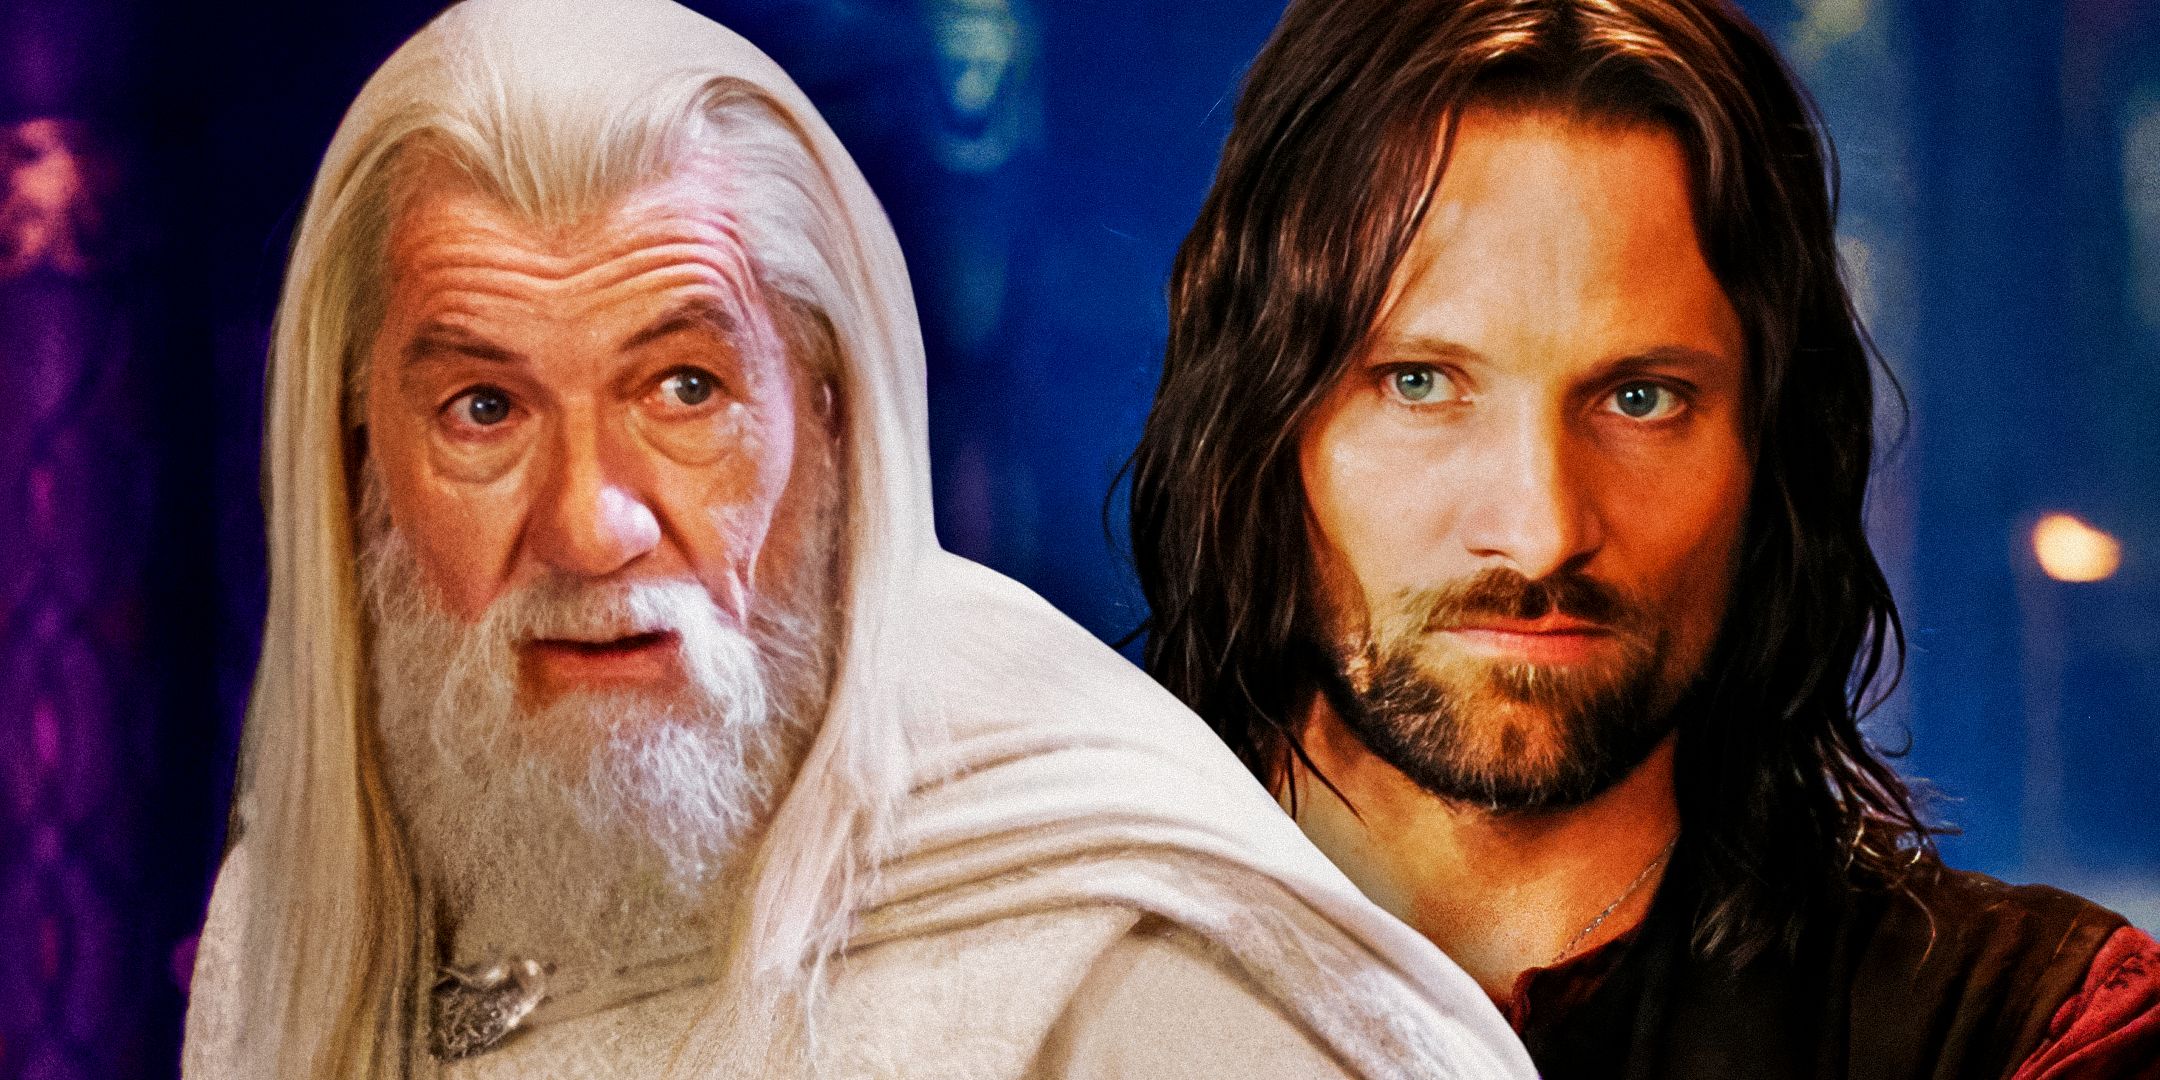 Viggo Mortensen and Ian McKellen as Gandalf from Lord of the Rings